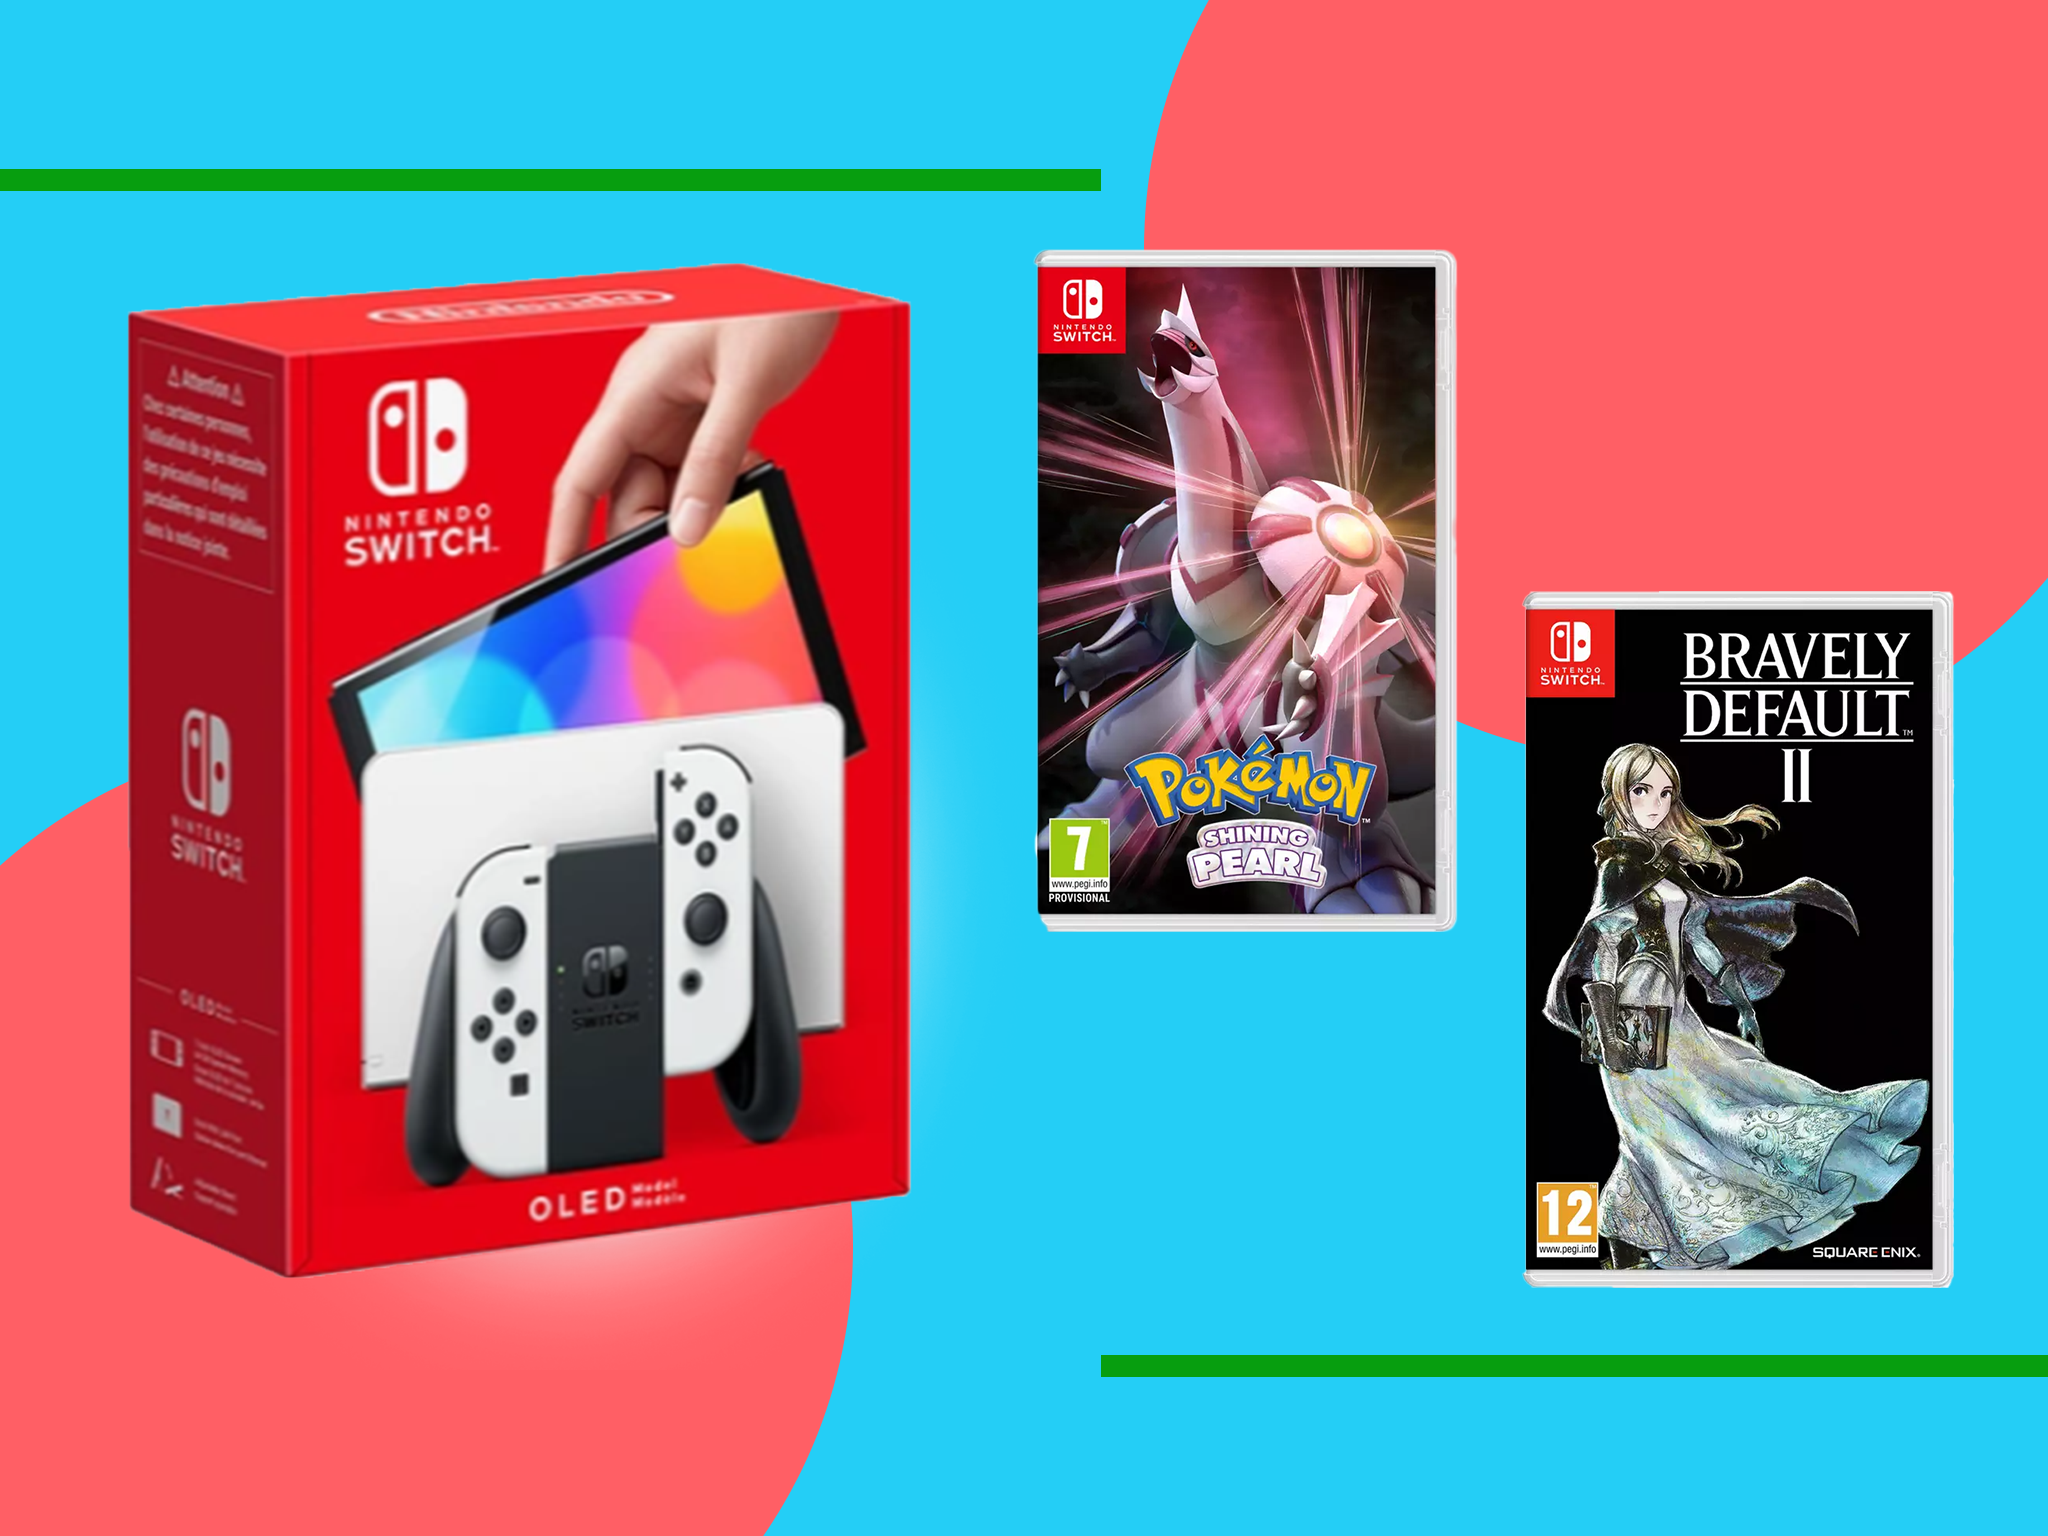 There’s an excellent saving to be had with this gaming bundle